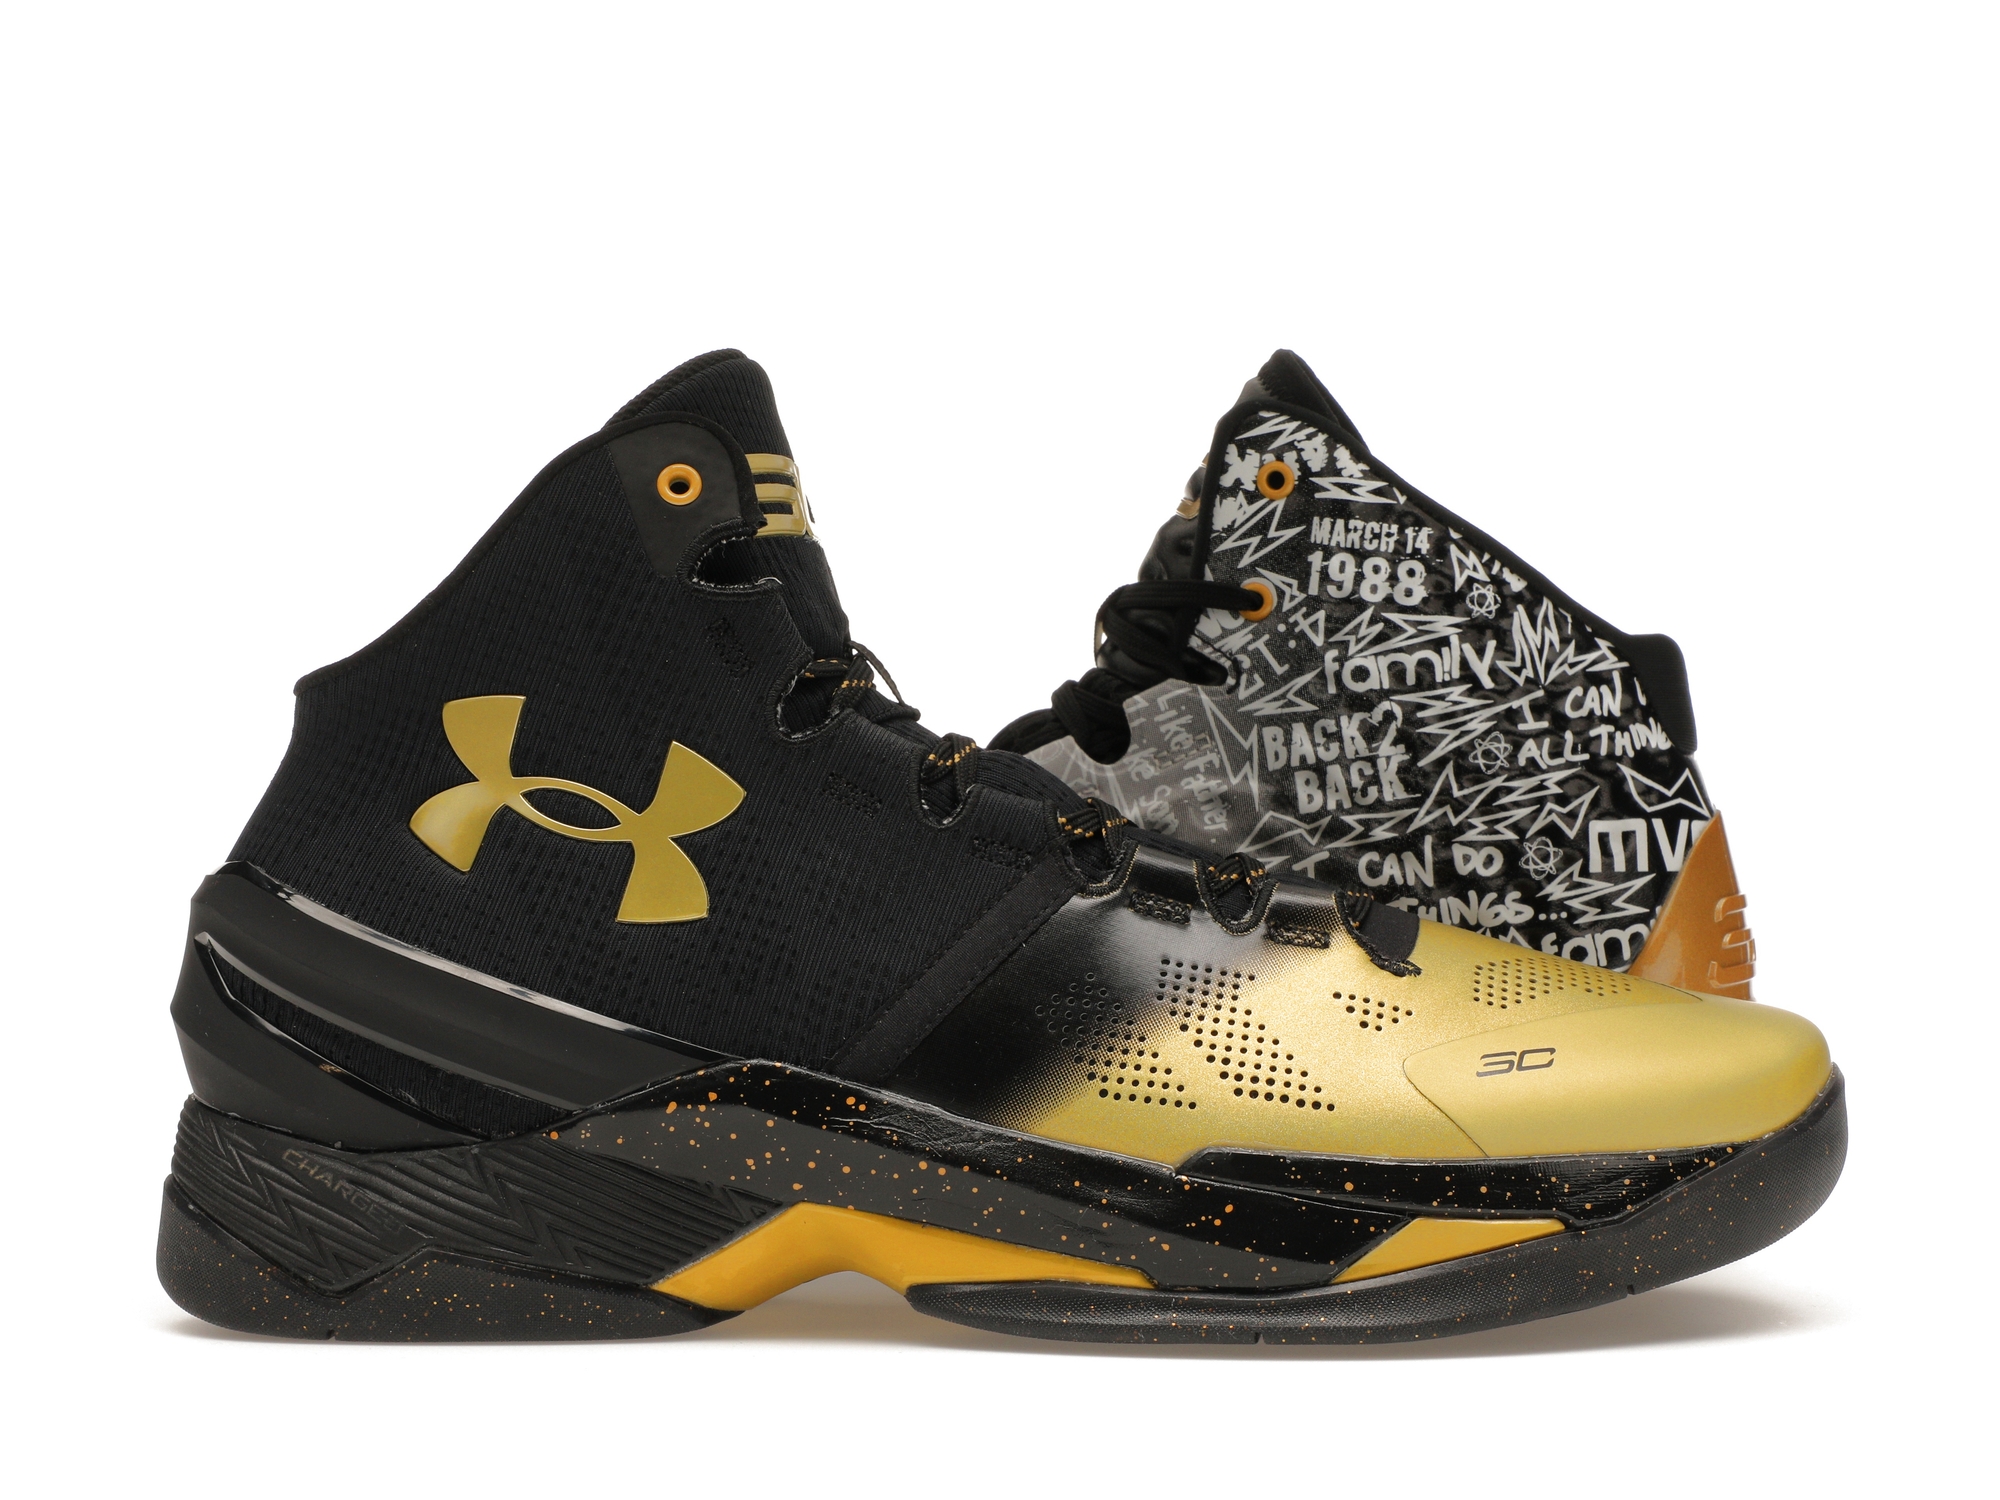 Under Armour Curry 1 & 2 Back 2 Back MVP Pack (2 Pairs)